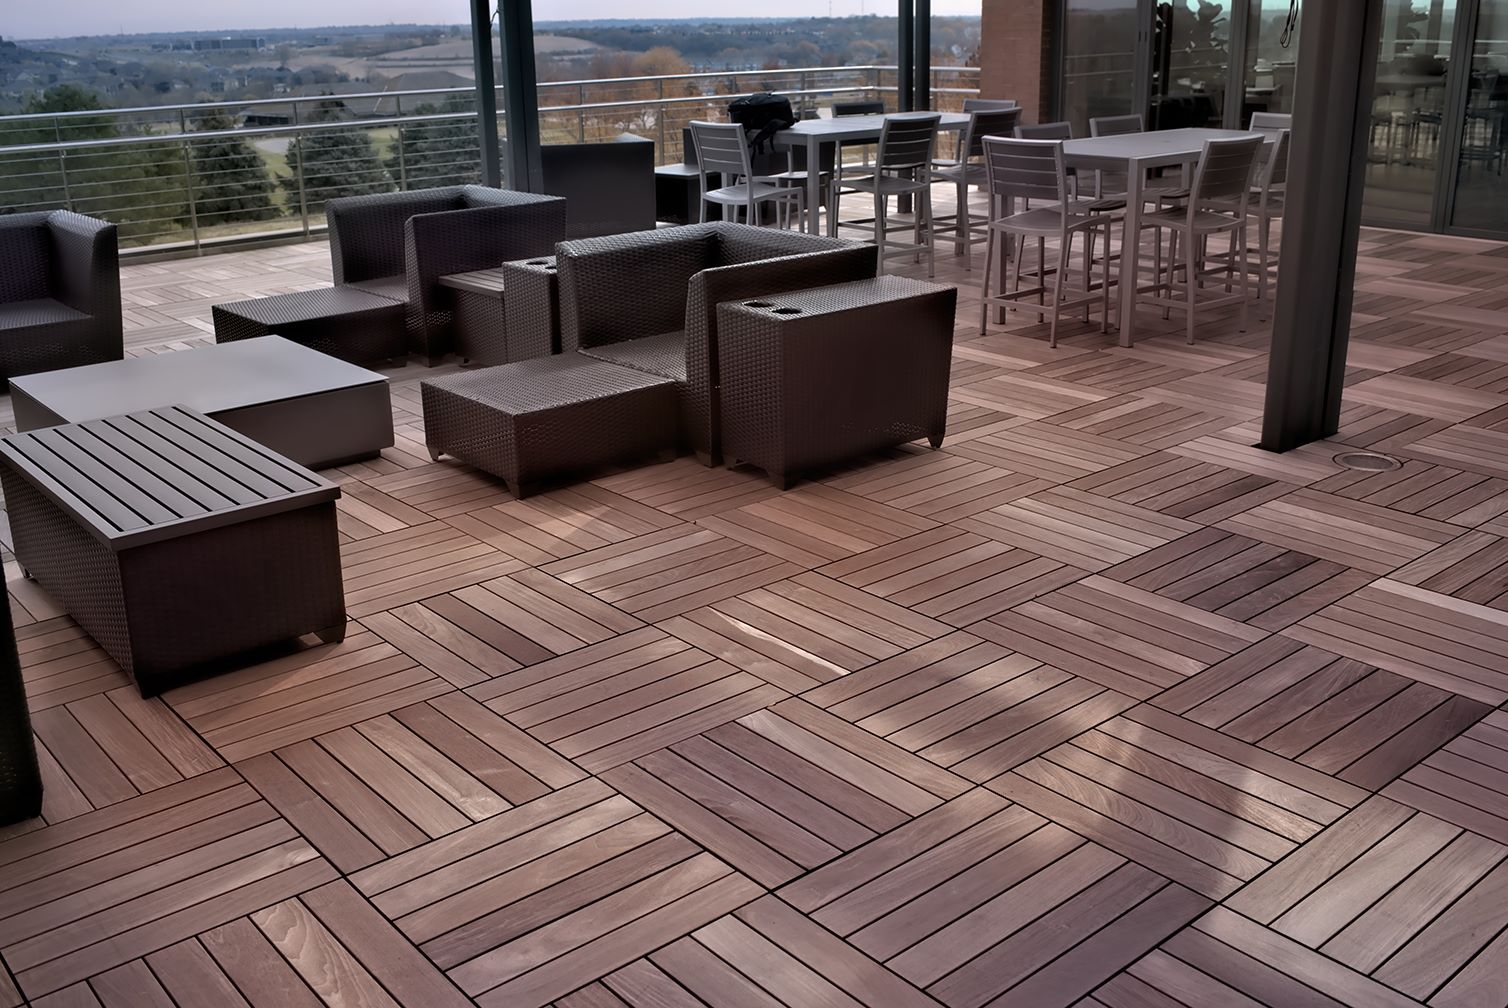 Bison's IPE wood paver's and pedestals installed on a roof deck.